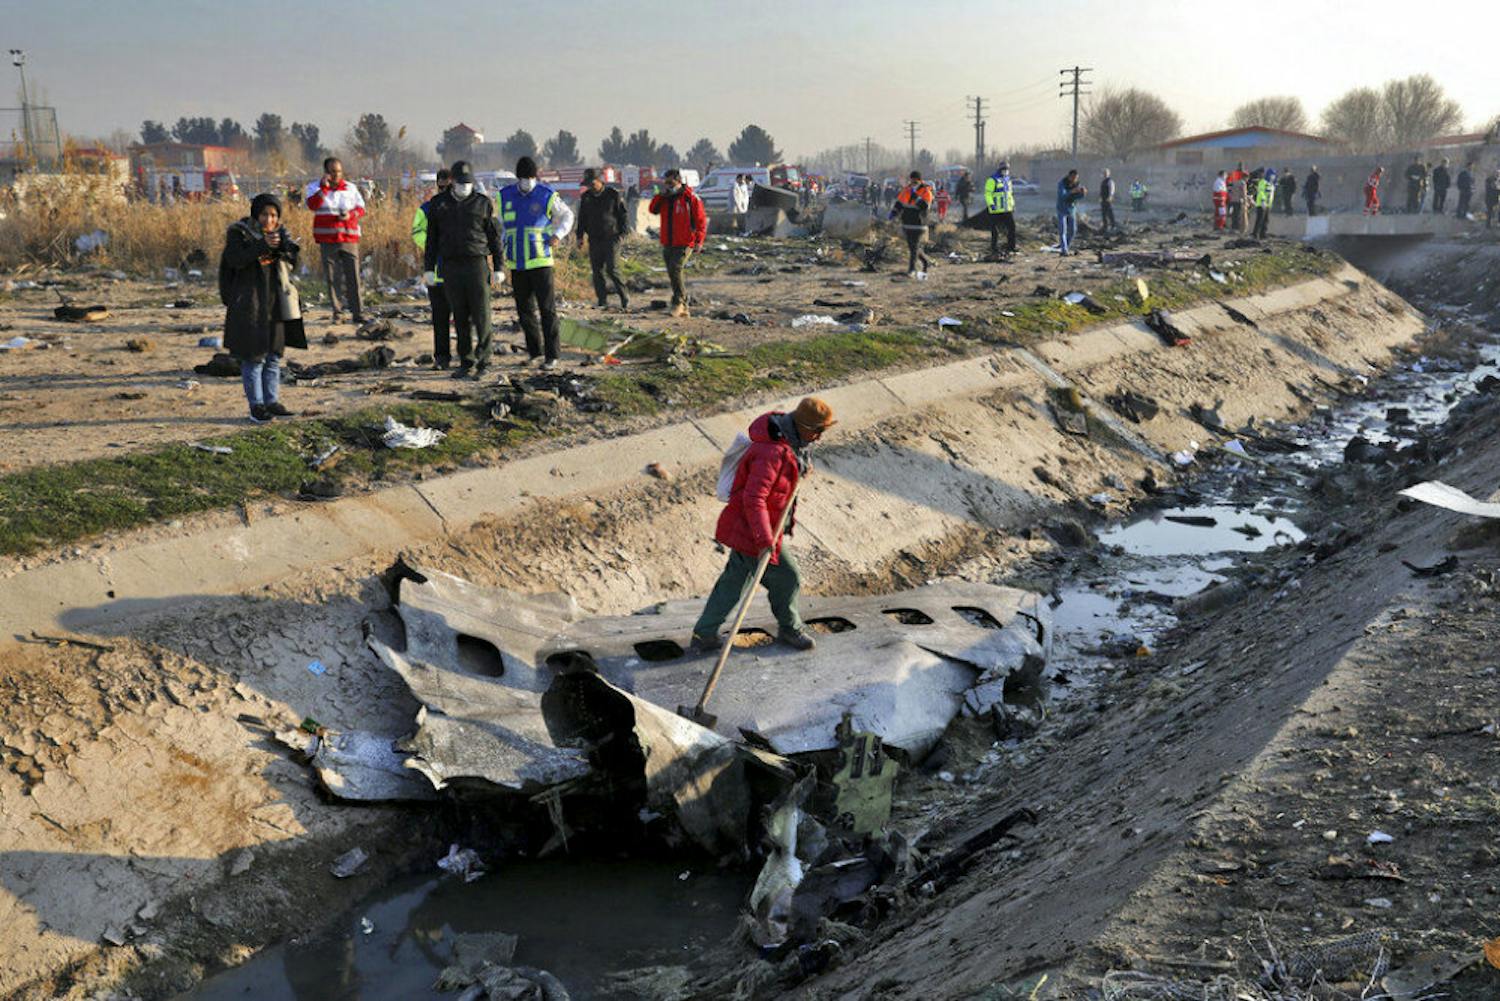 Rescue workers inspect the scene where a Ukrainian plane crashed in Shahedshahr, southwest of the capital Tehran, Iran, Wednesday, Jan. 8, 2020. A Ukrainian airplane with more than 170 people crashed on Wednesday shortly after takeoff from Tehran's main airport, killing all onboard. (AP Photo/Ebrahim Noroozi)